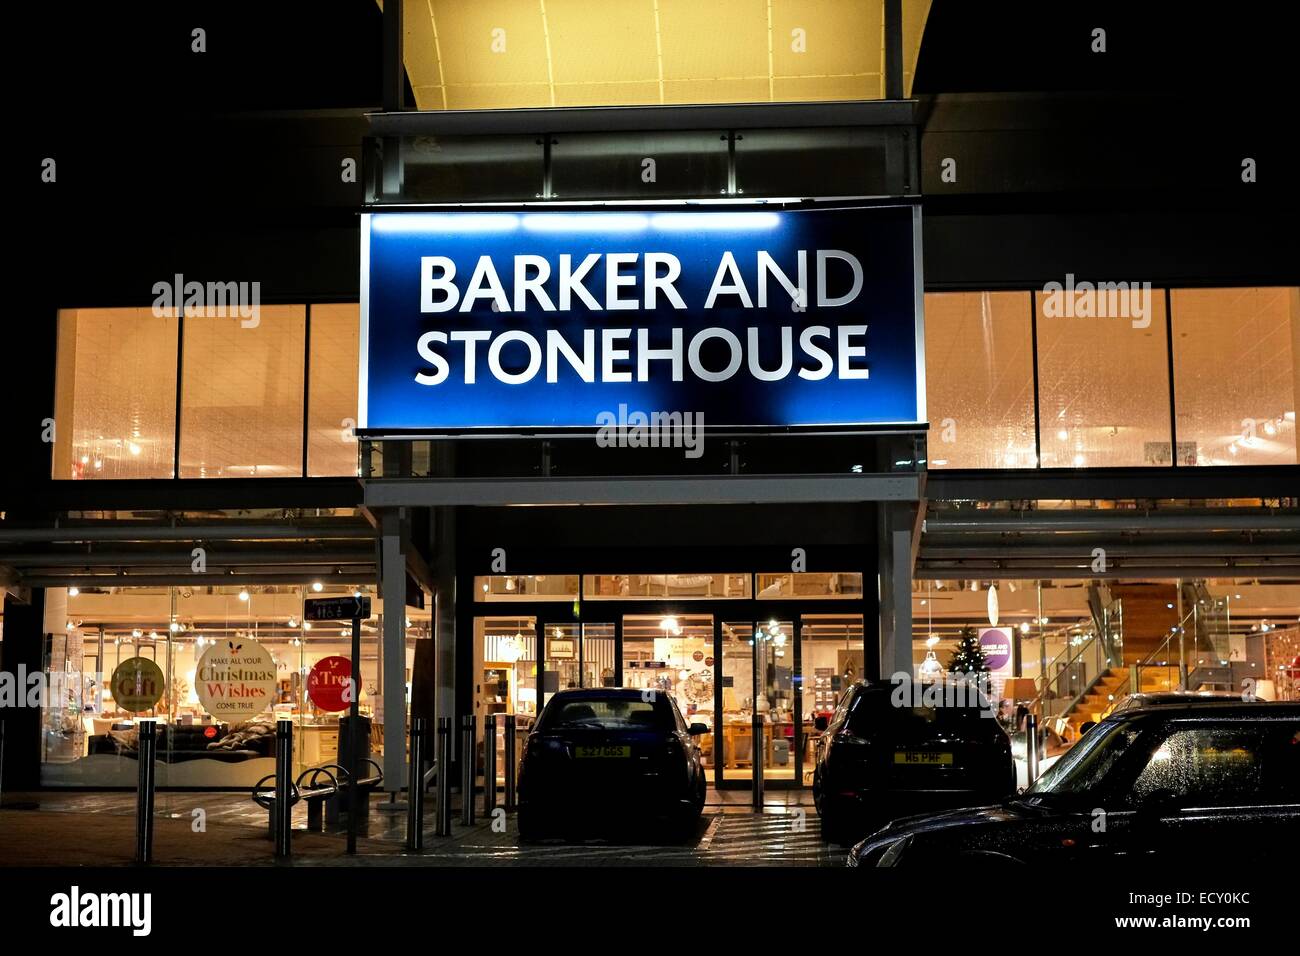 Barker and stonehouse furniture superstore England UK Stock Photo - Alamy